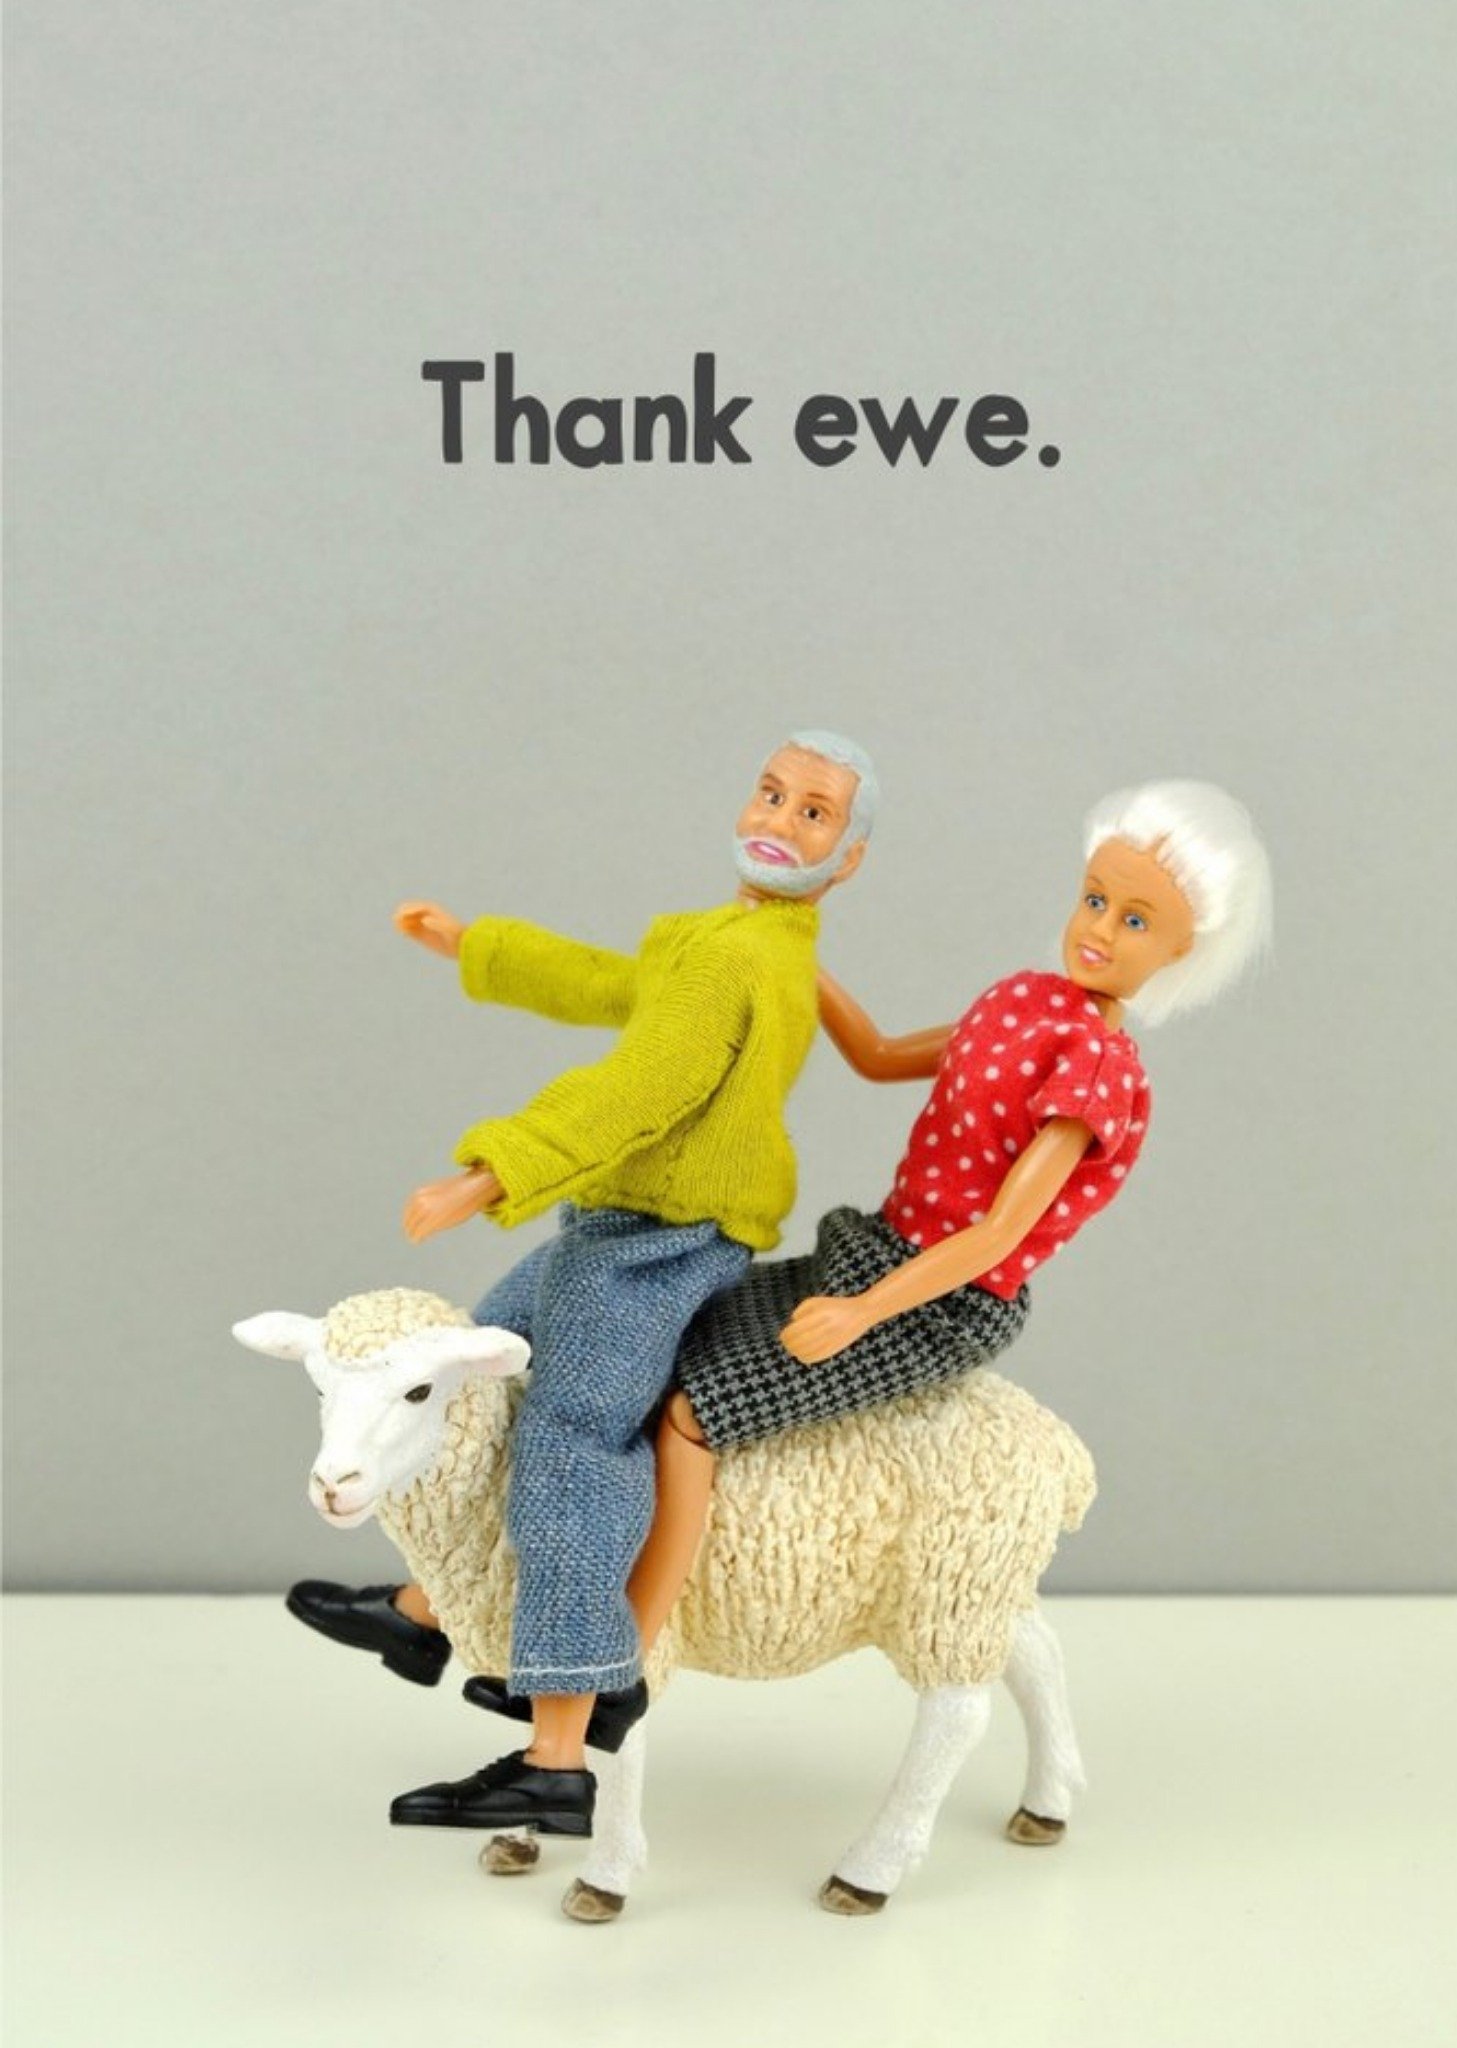 Bold And Bright Funny Photograph Of A Female And Male Doll Riding On A Sheep Thank You Card Ecard